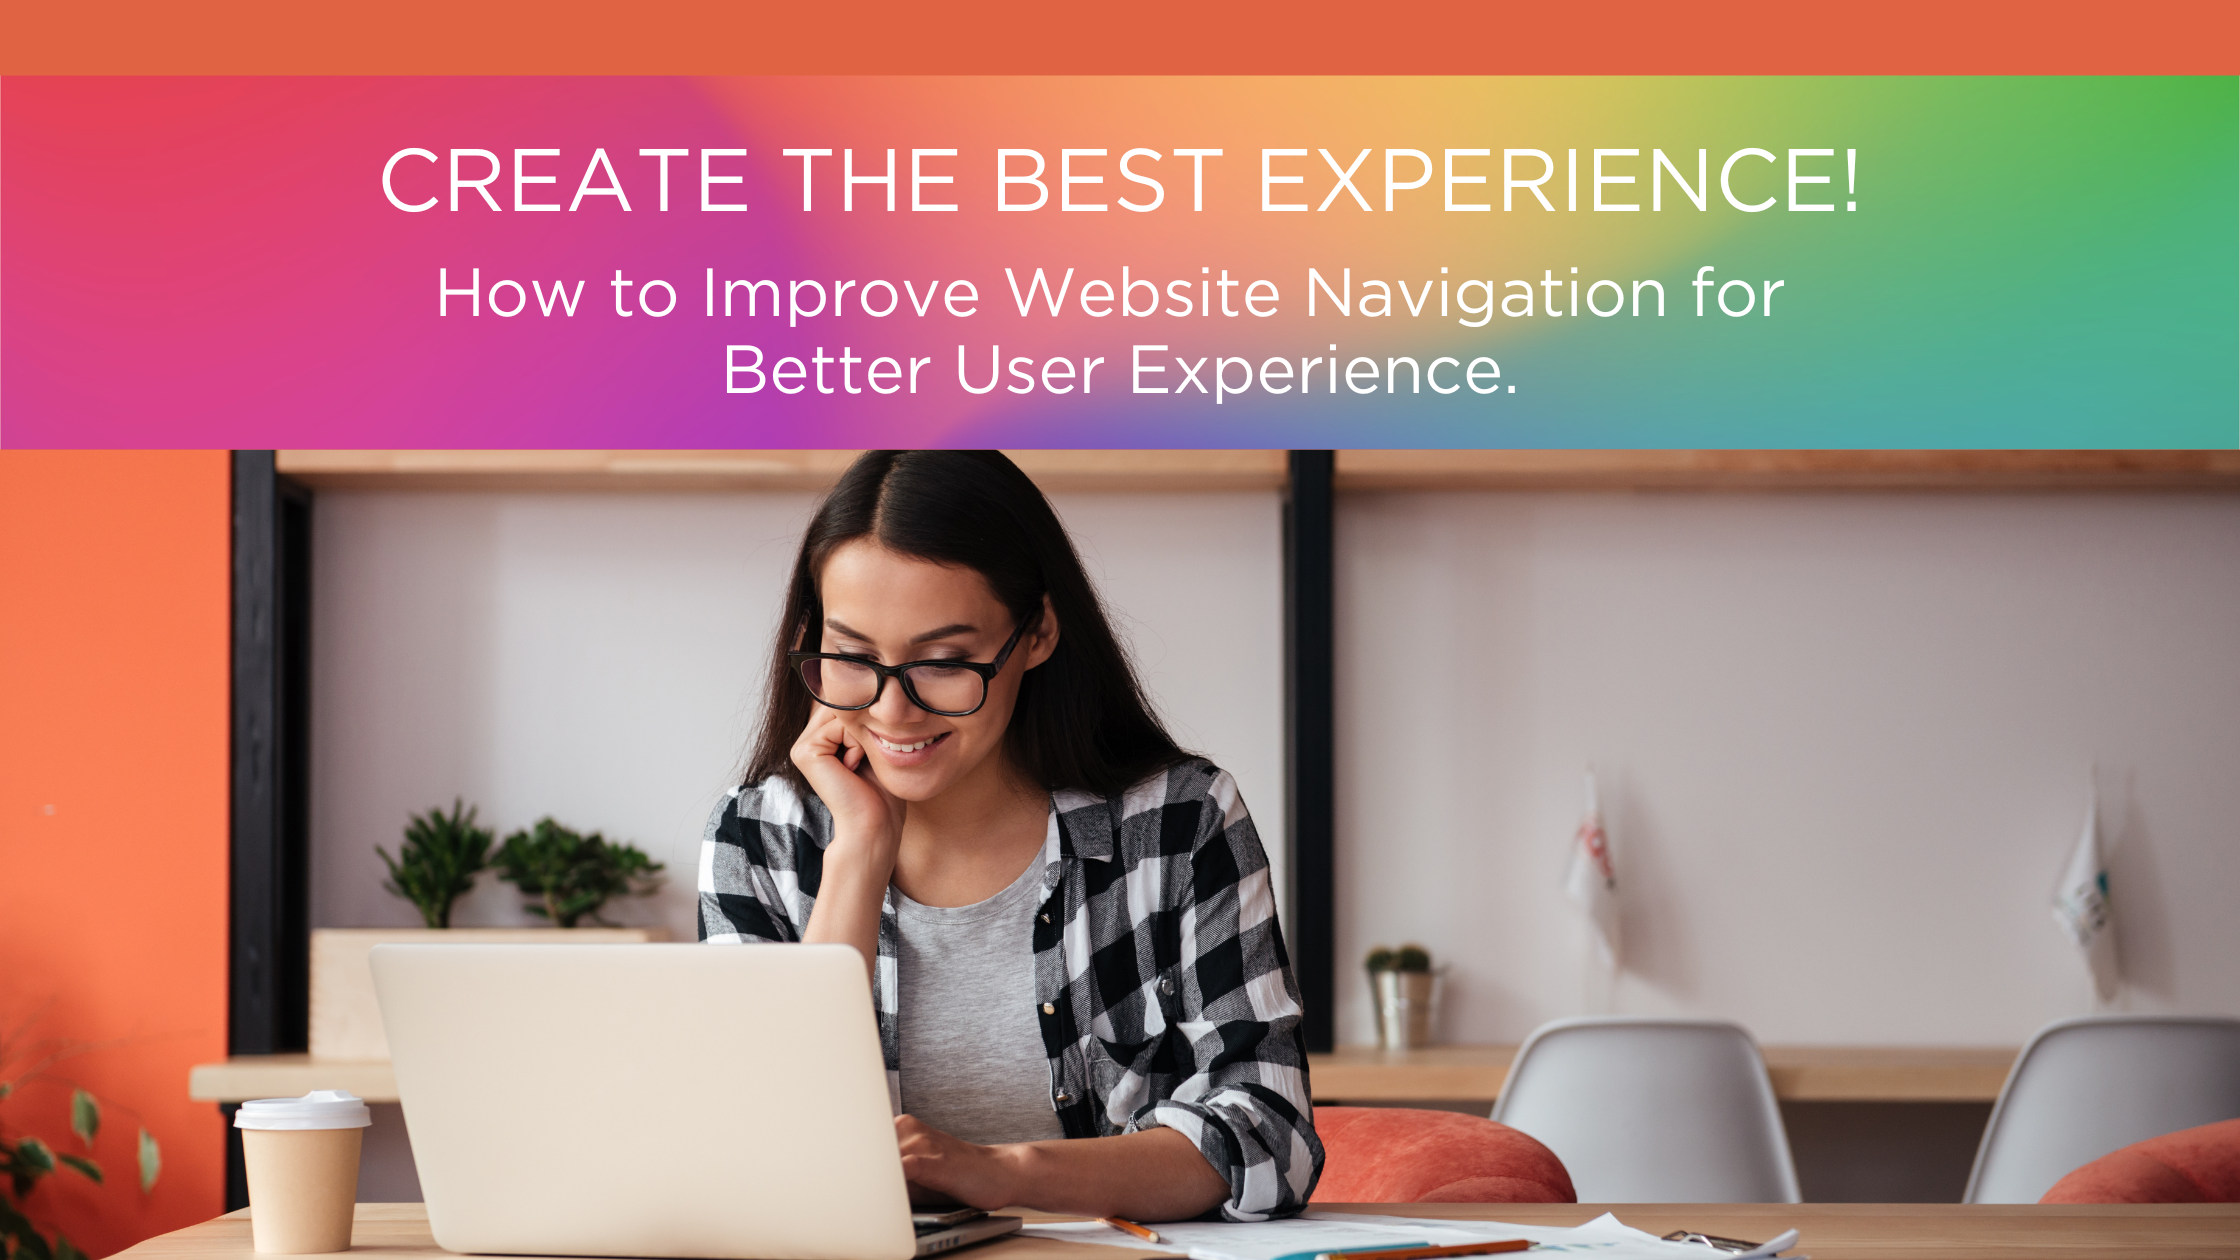 How to Improve Website Navigation for Better User Experience